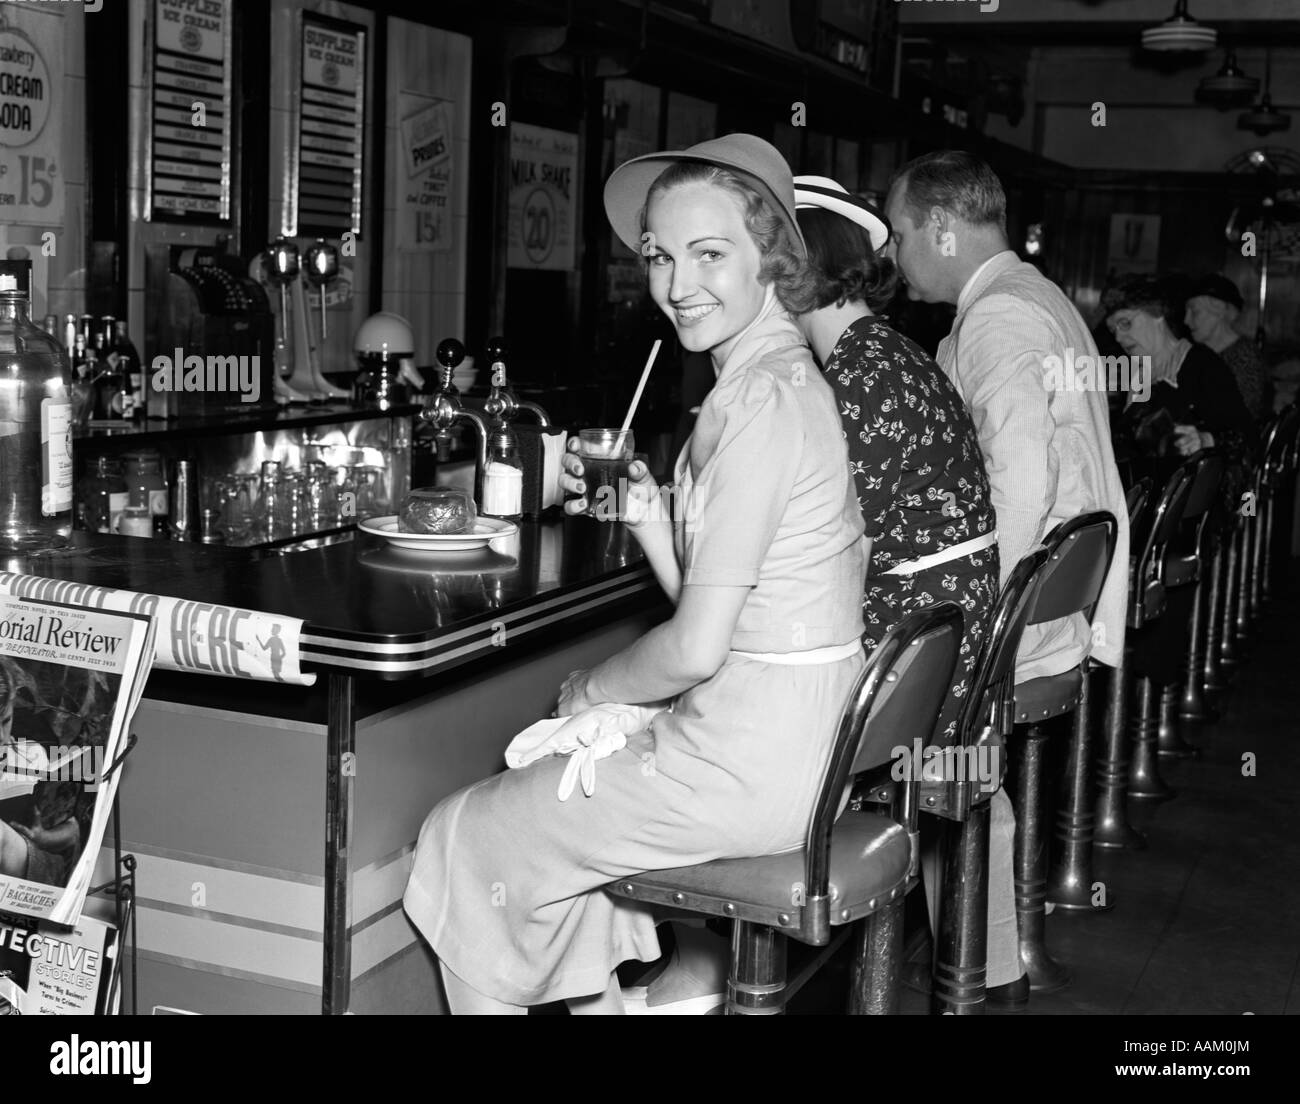 1940s SMILING WOMEN DRESSED IN LINEN DRESS HAT HOLDING GLASS COLA SITTING AT COUNTER SODA FOUNTAIN LOOKING AT CAMERA Stock Photo